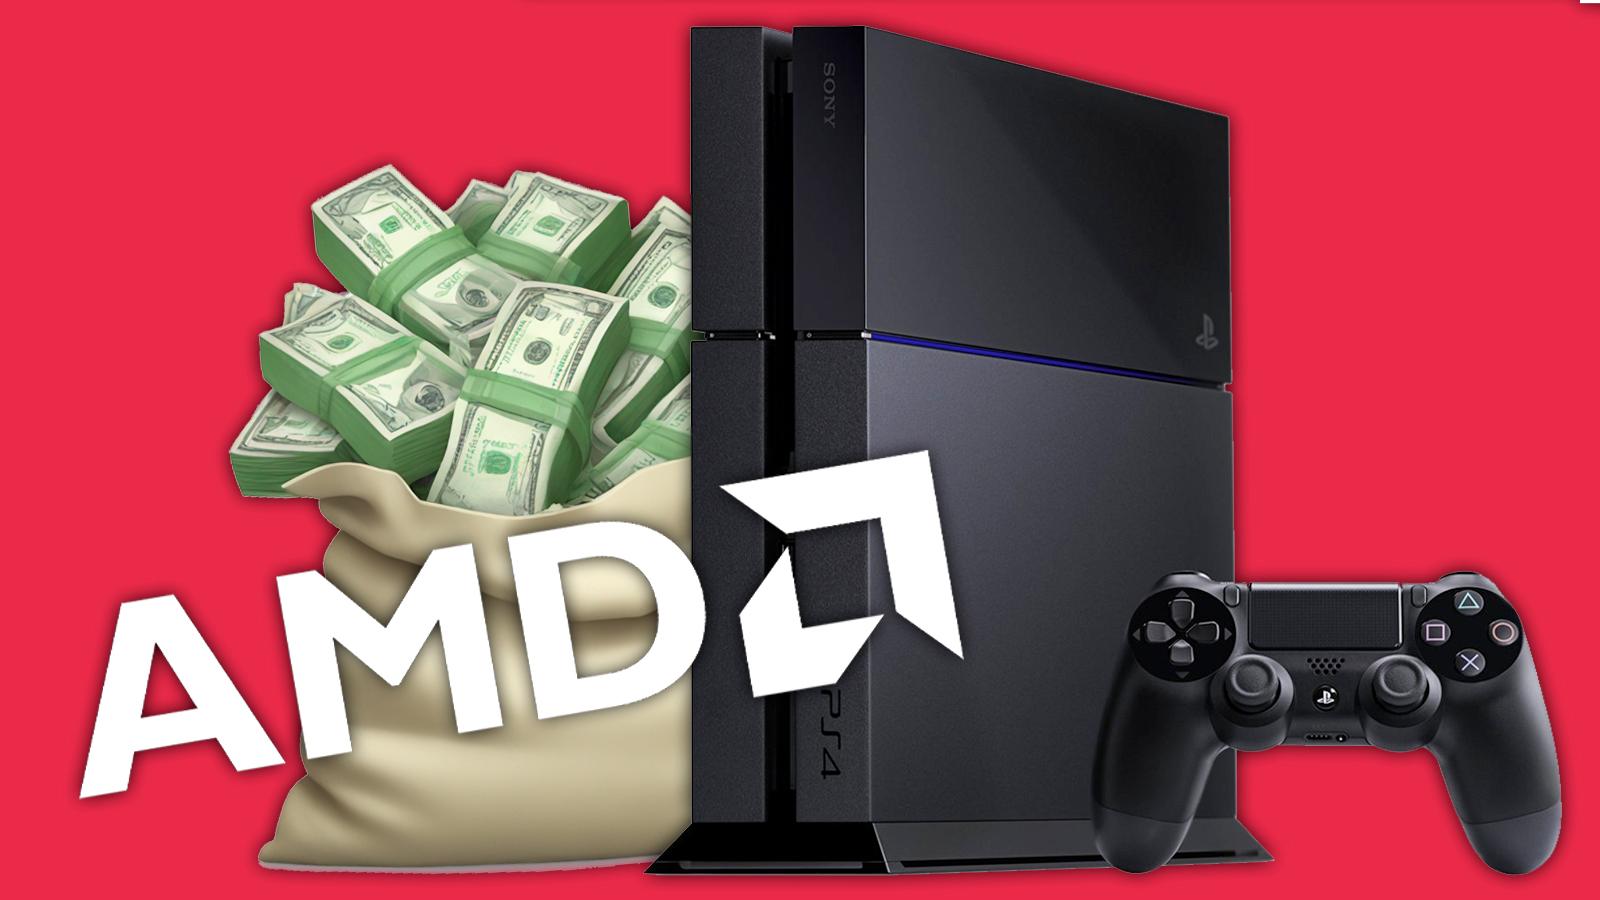 PS4 with sack of cash & AMD logo on it